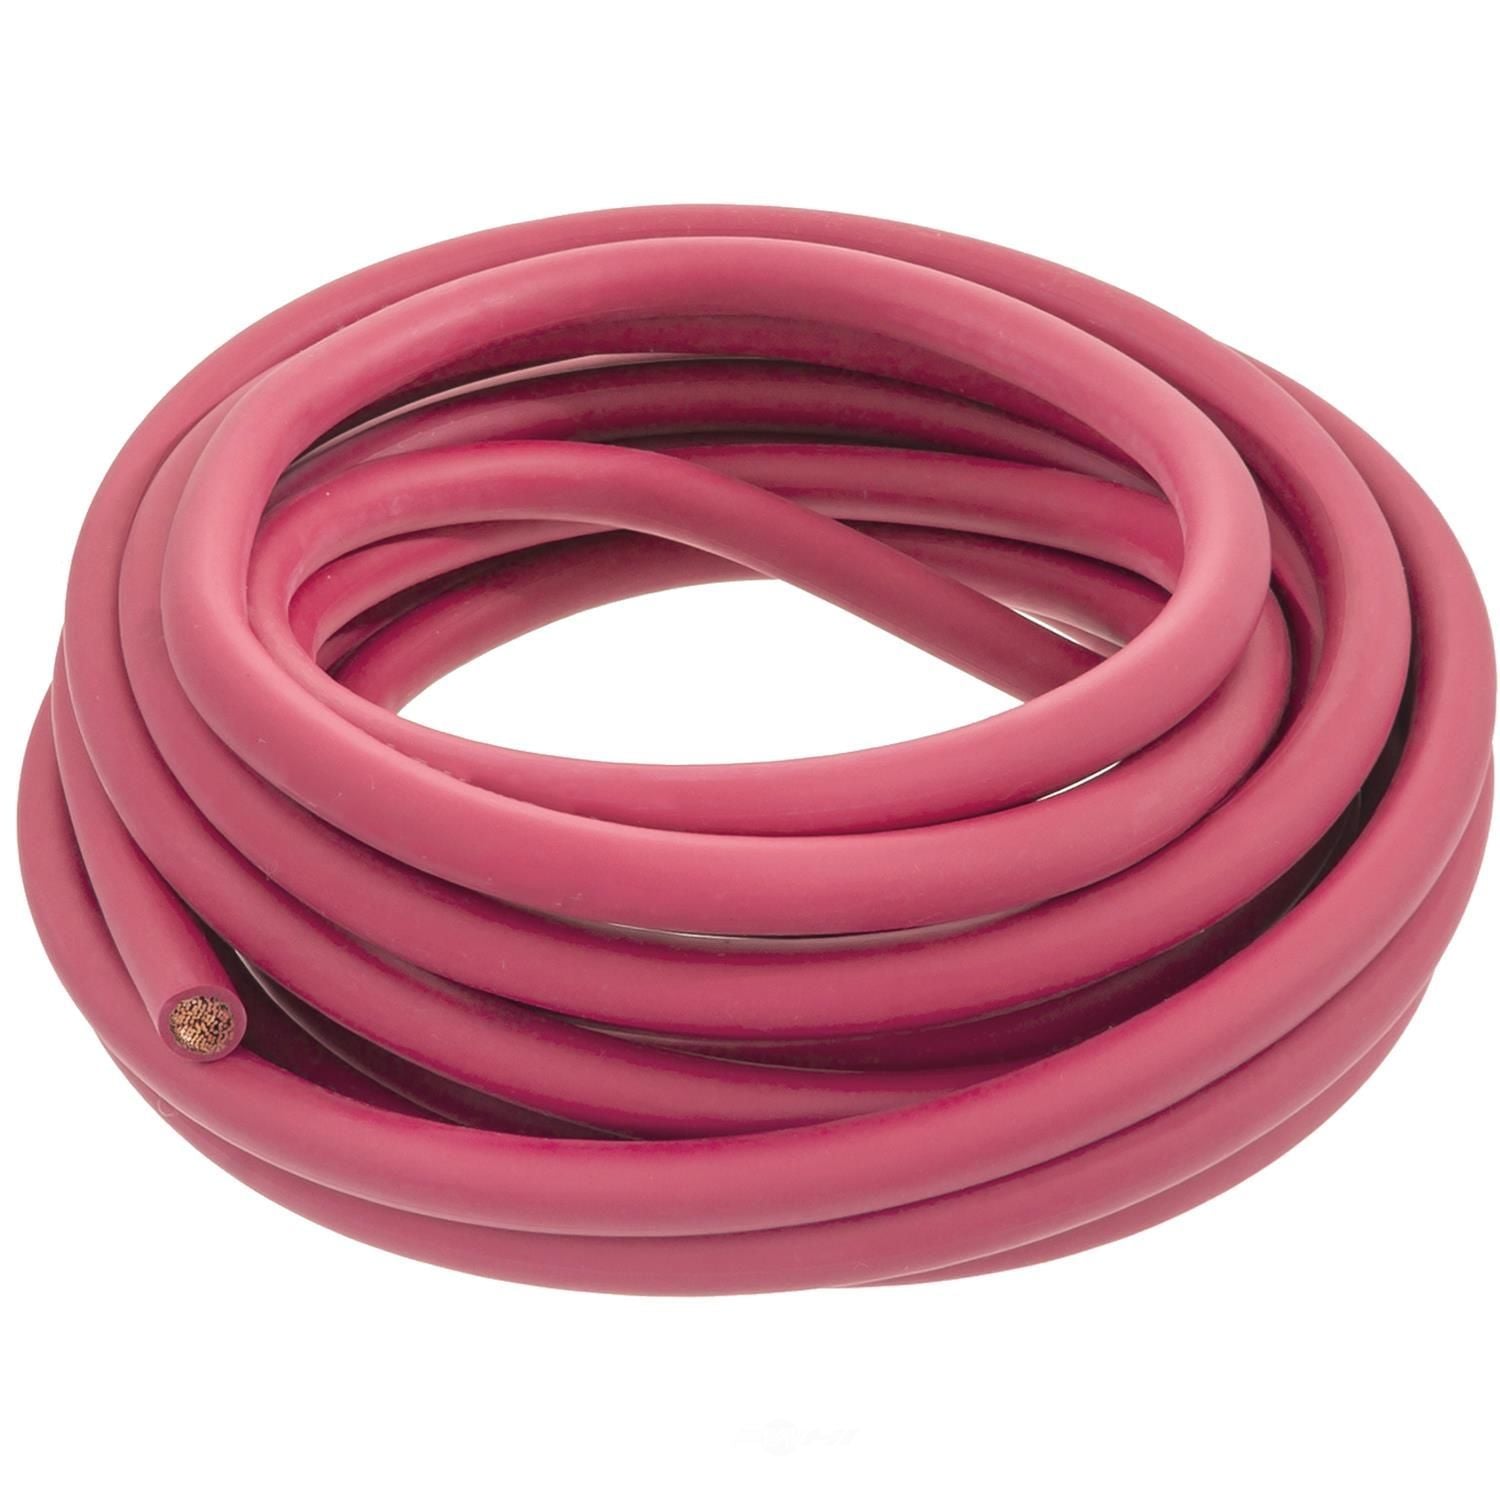 YSP CB18RD-25 Wells Bulk Cable (Red, 25', 3/0G)